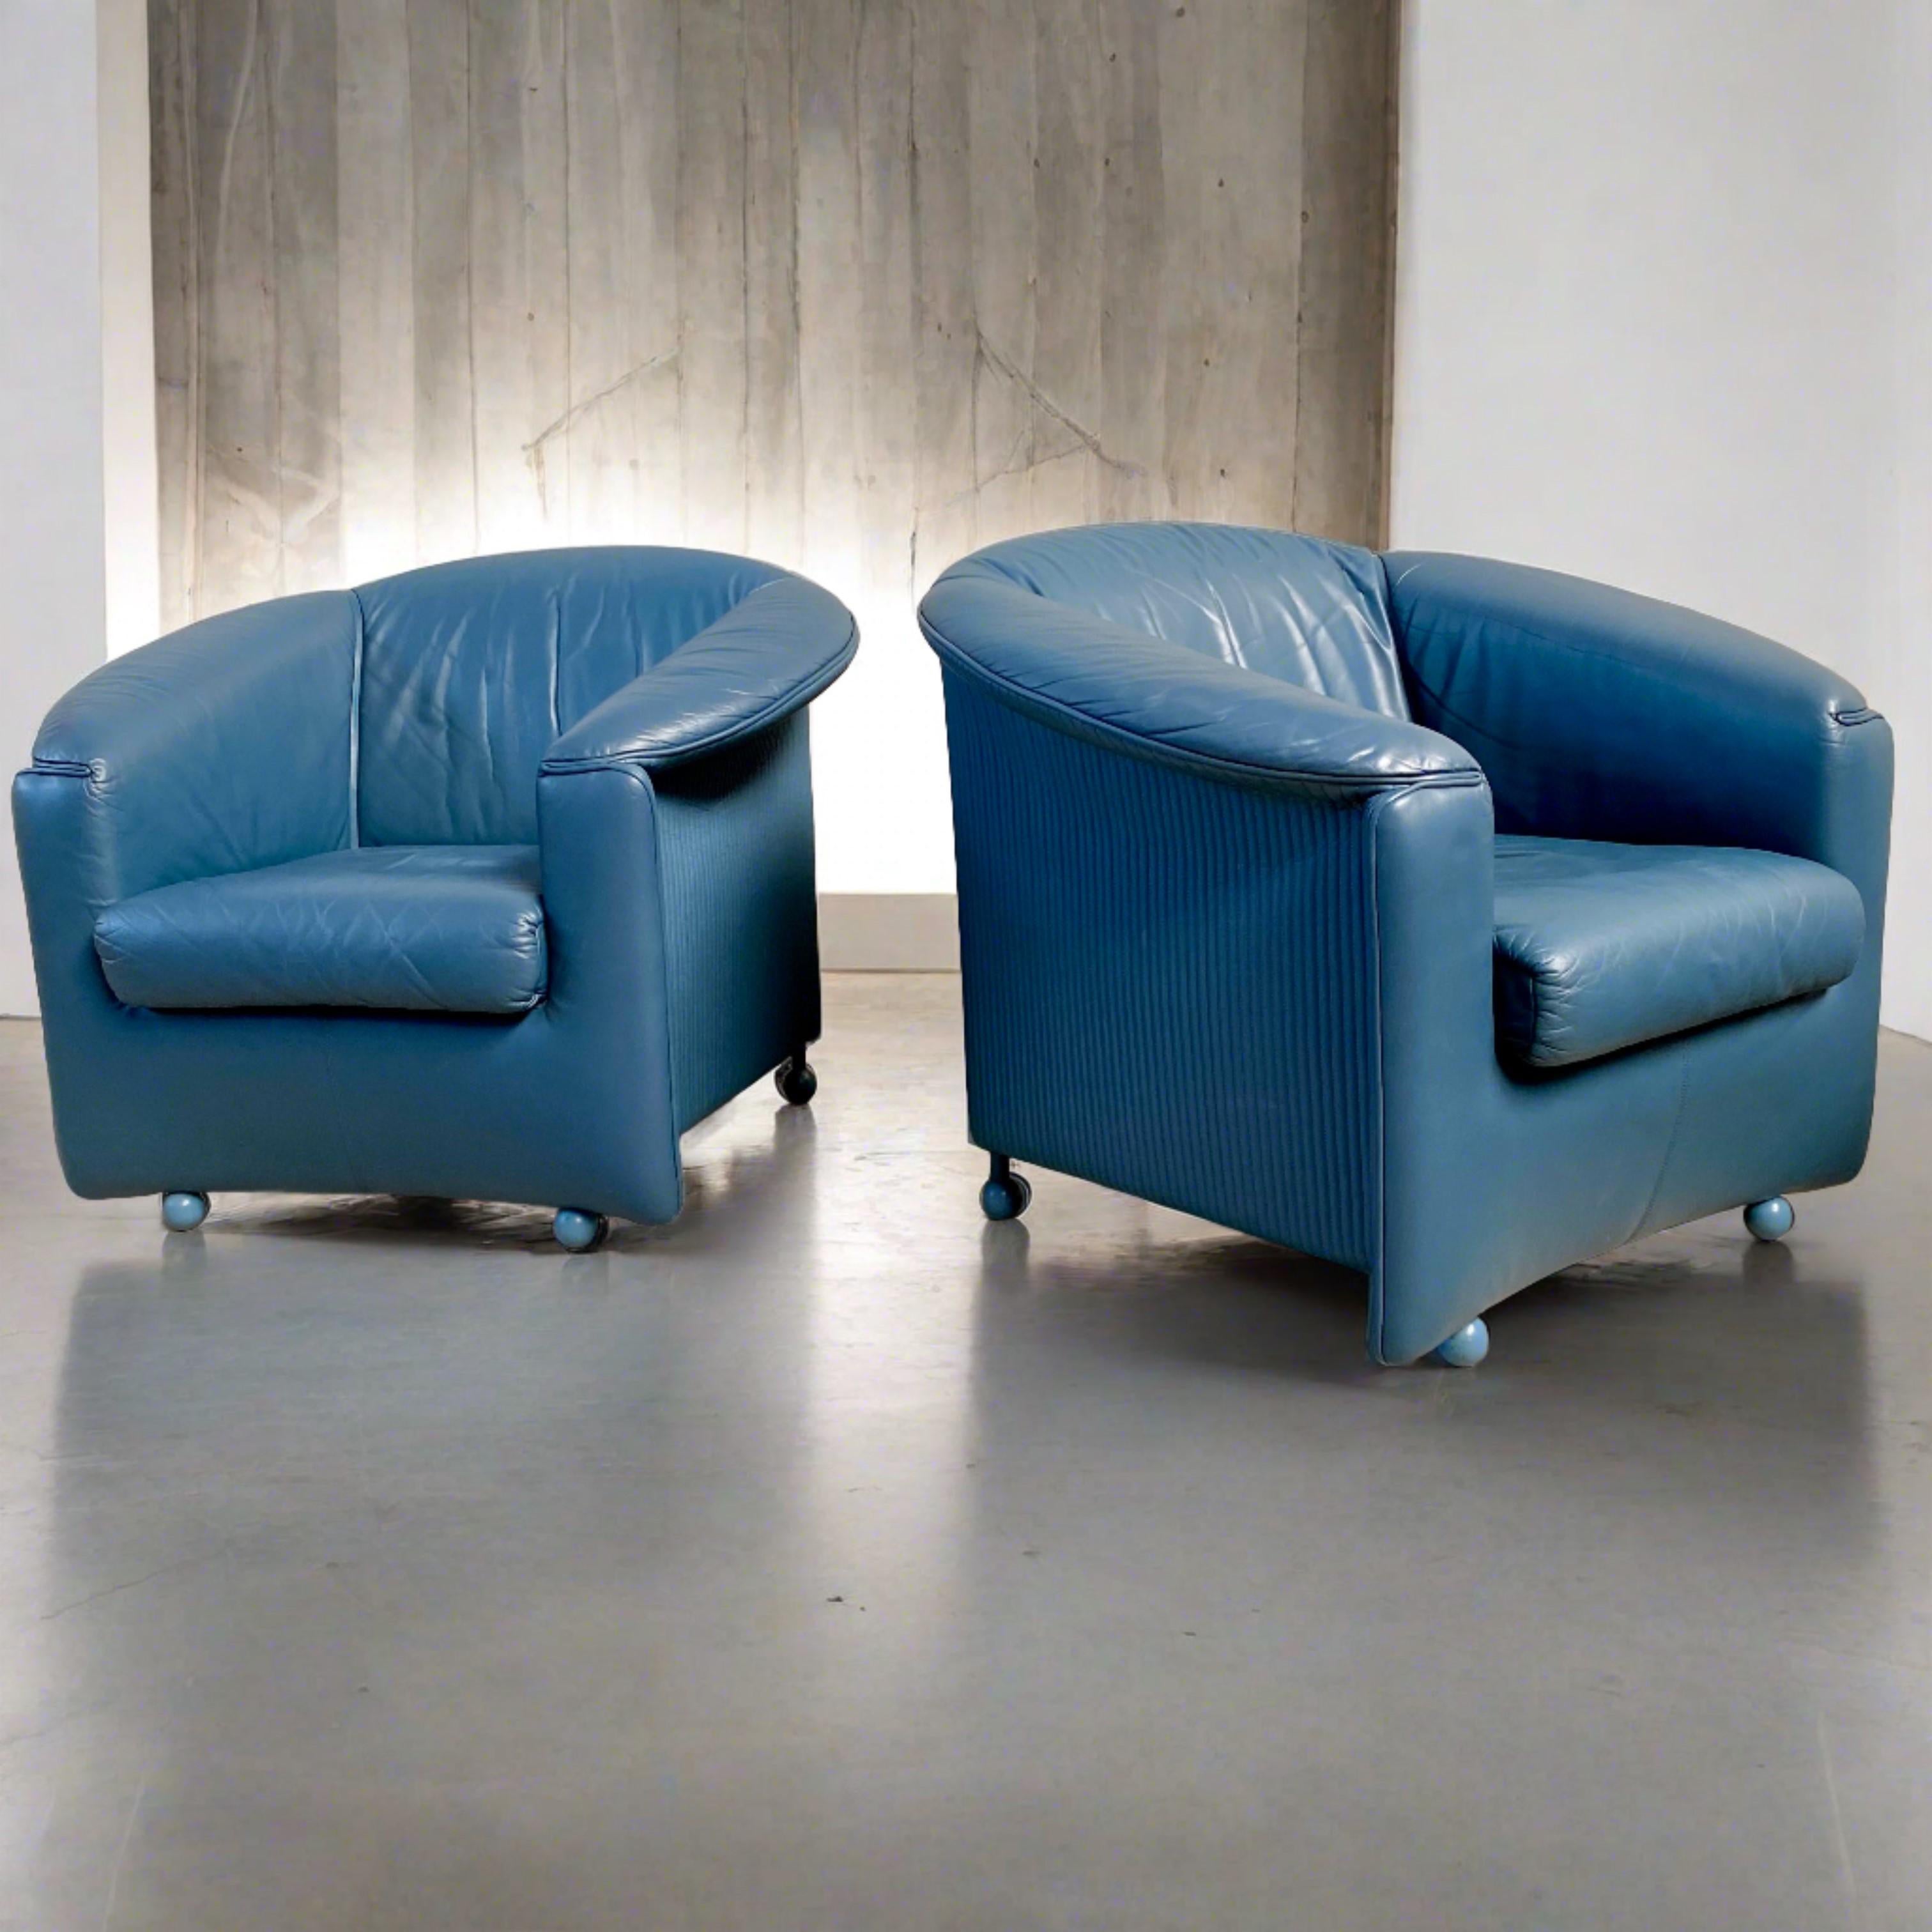 SET OF 2 LEATHER ARM CHAIRS BY PAOLO PIVA FOR WITTMANN, AUSTRIA 1980S

Looking for a vintage touch to your home decor? Look no further than this set of 2 vintage blue leather armchairs, model Aura by Paolo Piva for Wittmann, Austria from the 1980s.